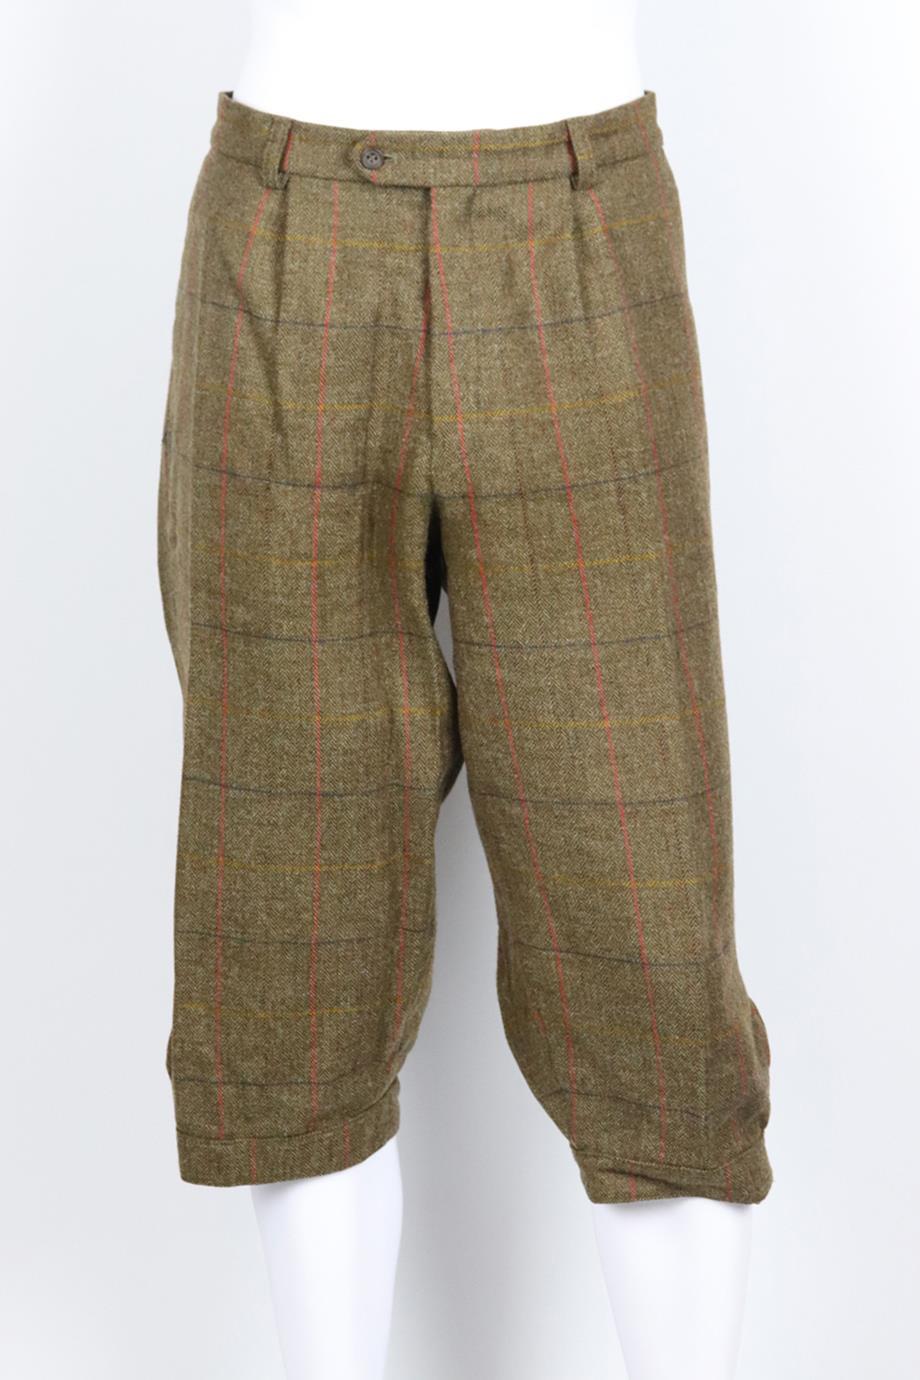 William & Son men's checked wool blend tweed pants. Brown, red, yellow and blue. Button and zip fastening at front. 100% Wool; lining: 100% viscose. Size: XXLarge (IT 54, EU 54, UK/US Waist 38). Waist: 37 in. Hips: 48.4 in. Length: 30 in. Inseam: 19